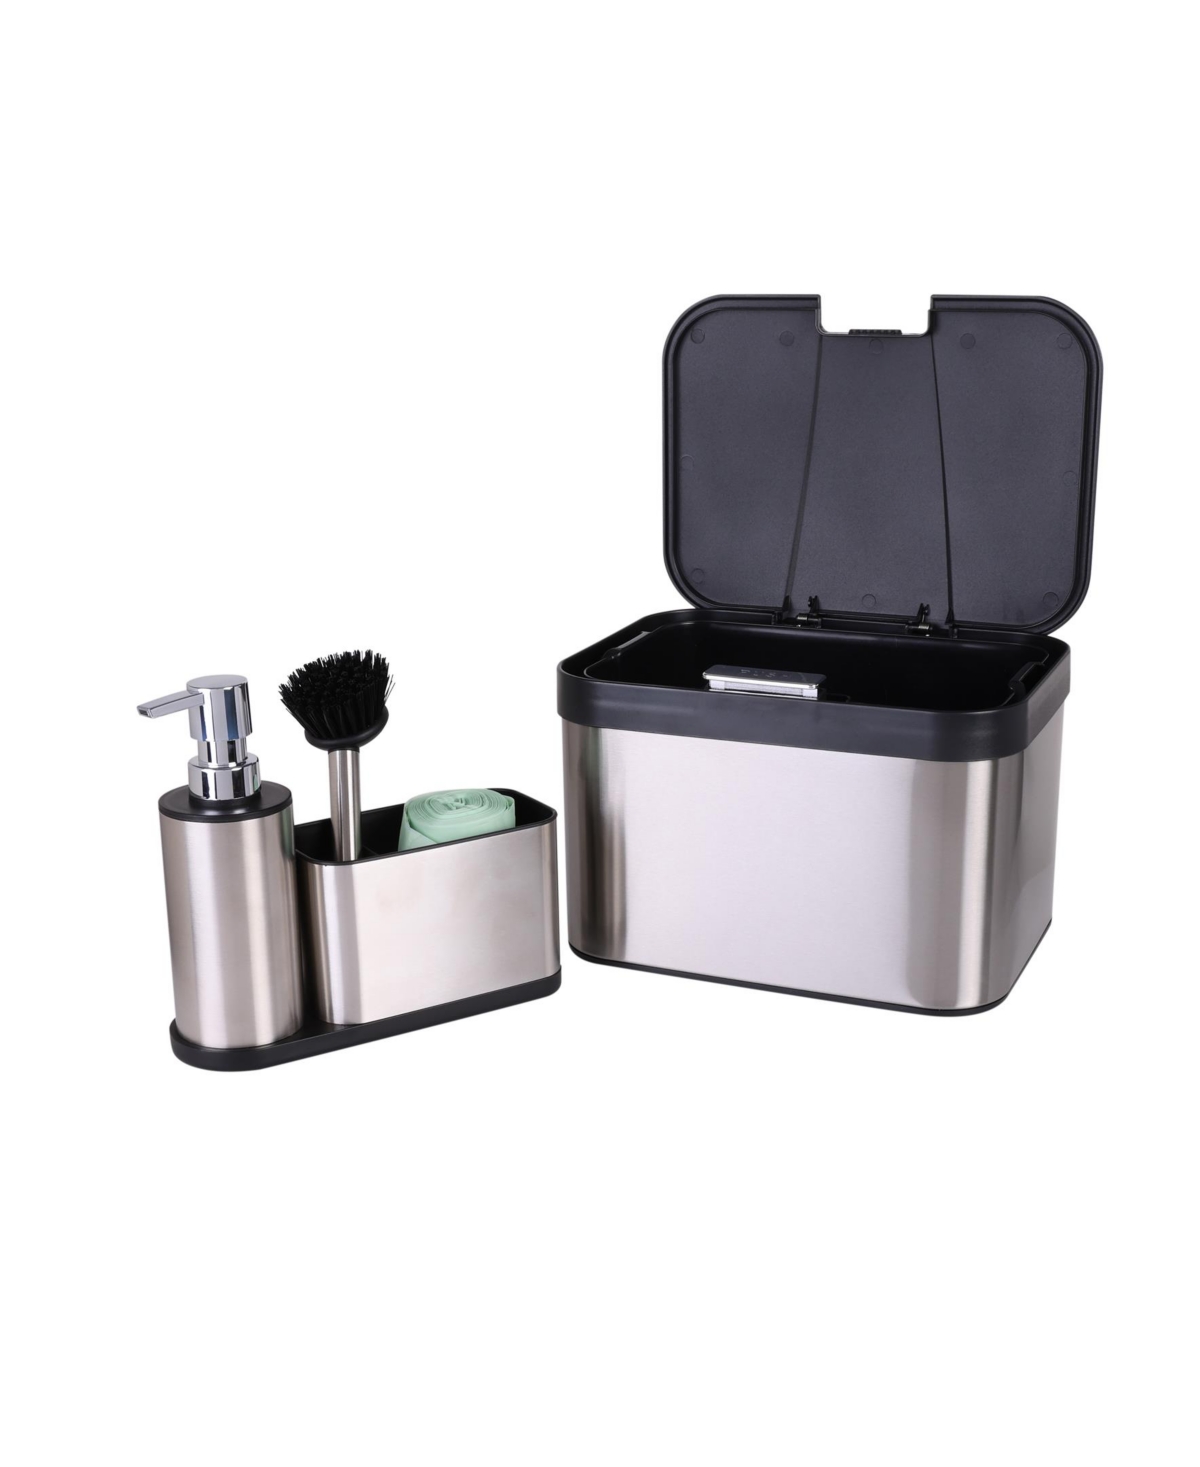 Shop Organize It All Stainless Steel Compost Bin Set With Biodegradable Bags, Sink Organizer & Scrub Brush